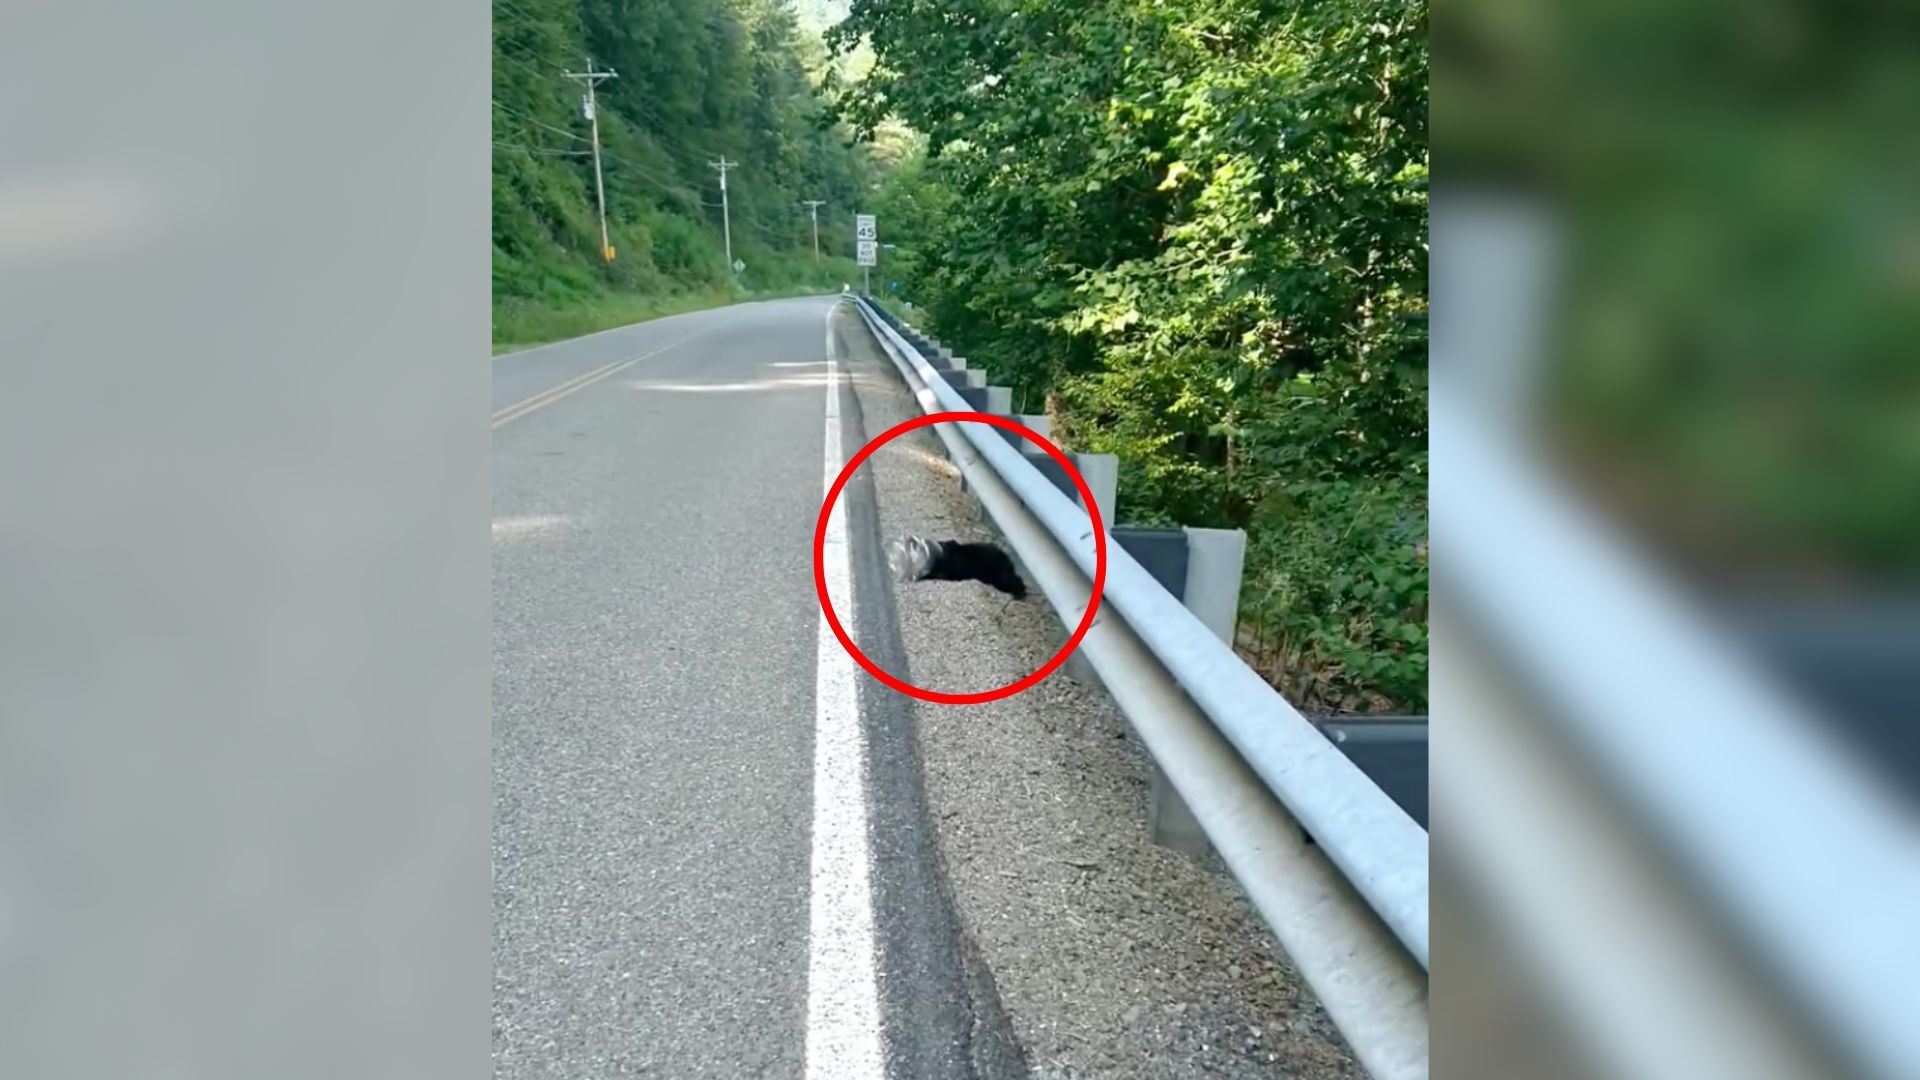 Woman Finds A Mysterious Animal On The Side Of The Road With Its Head Stuck In A Plastic Container